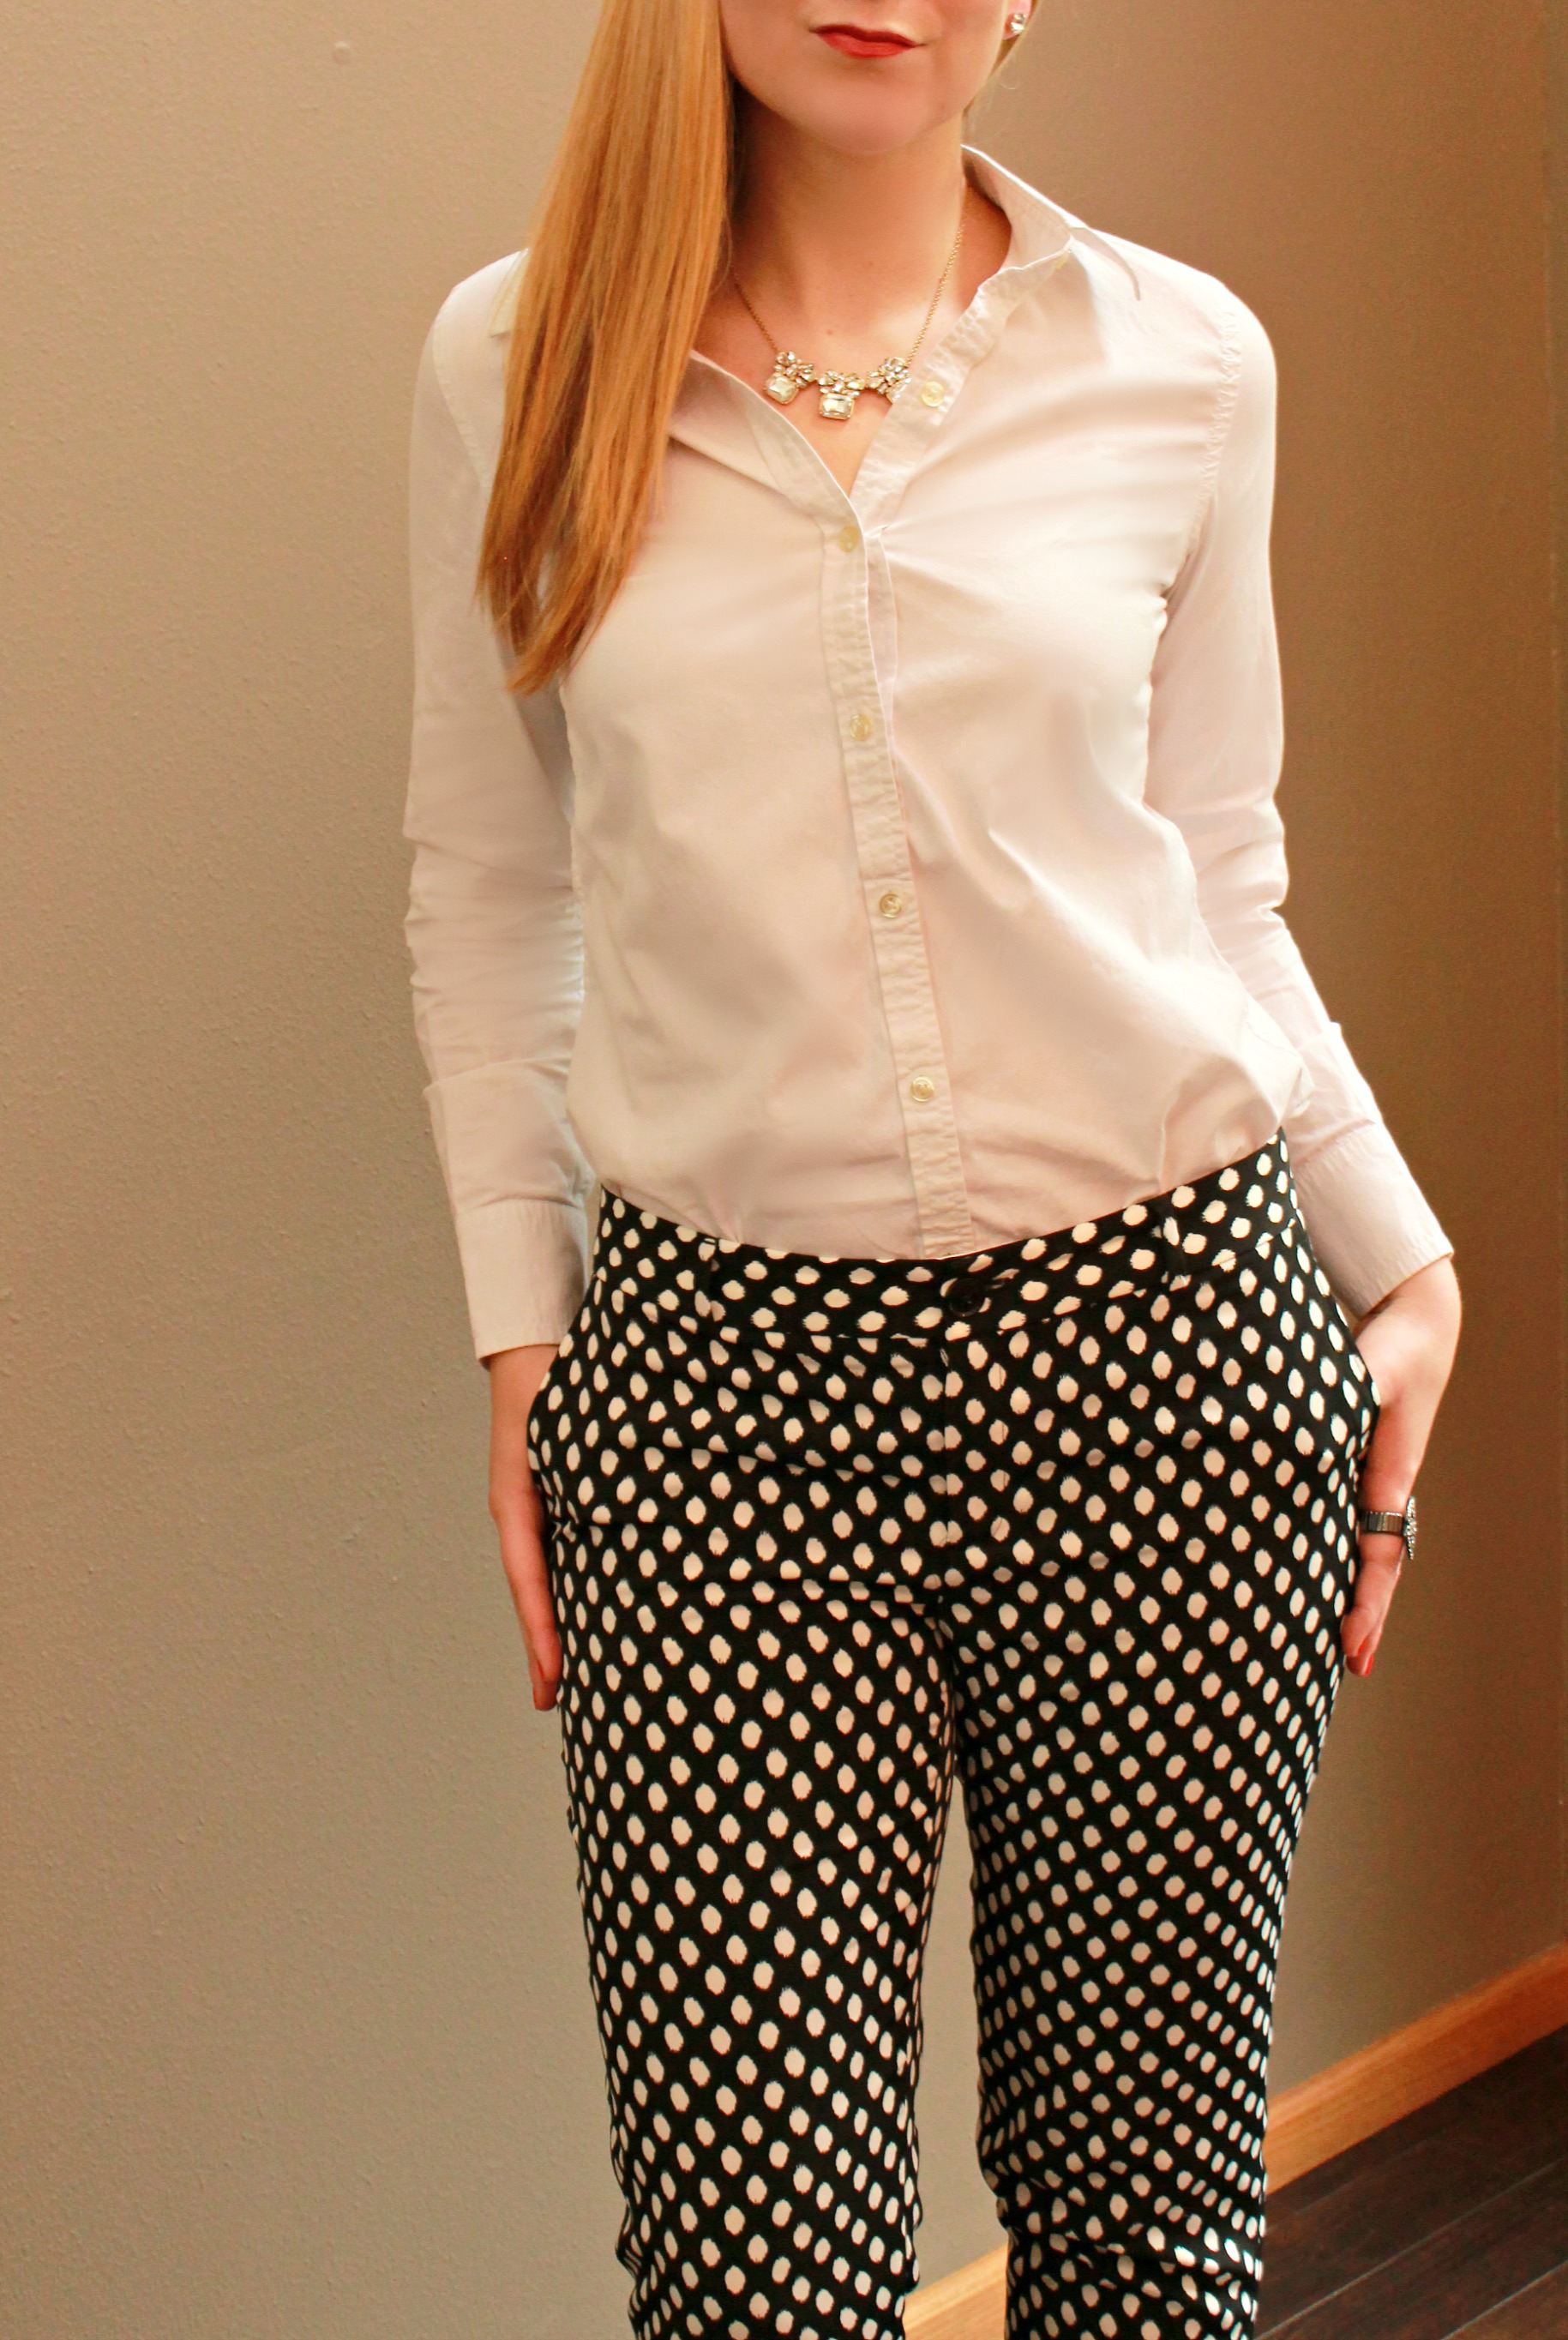 Printed pants + white button up